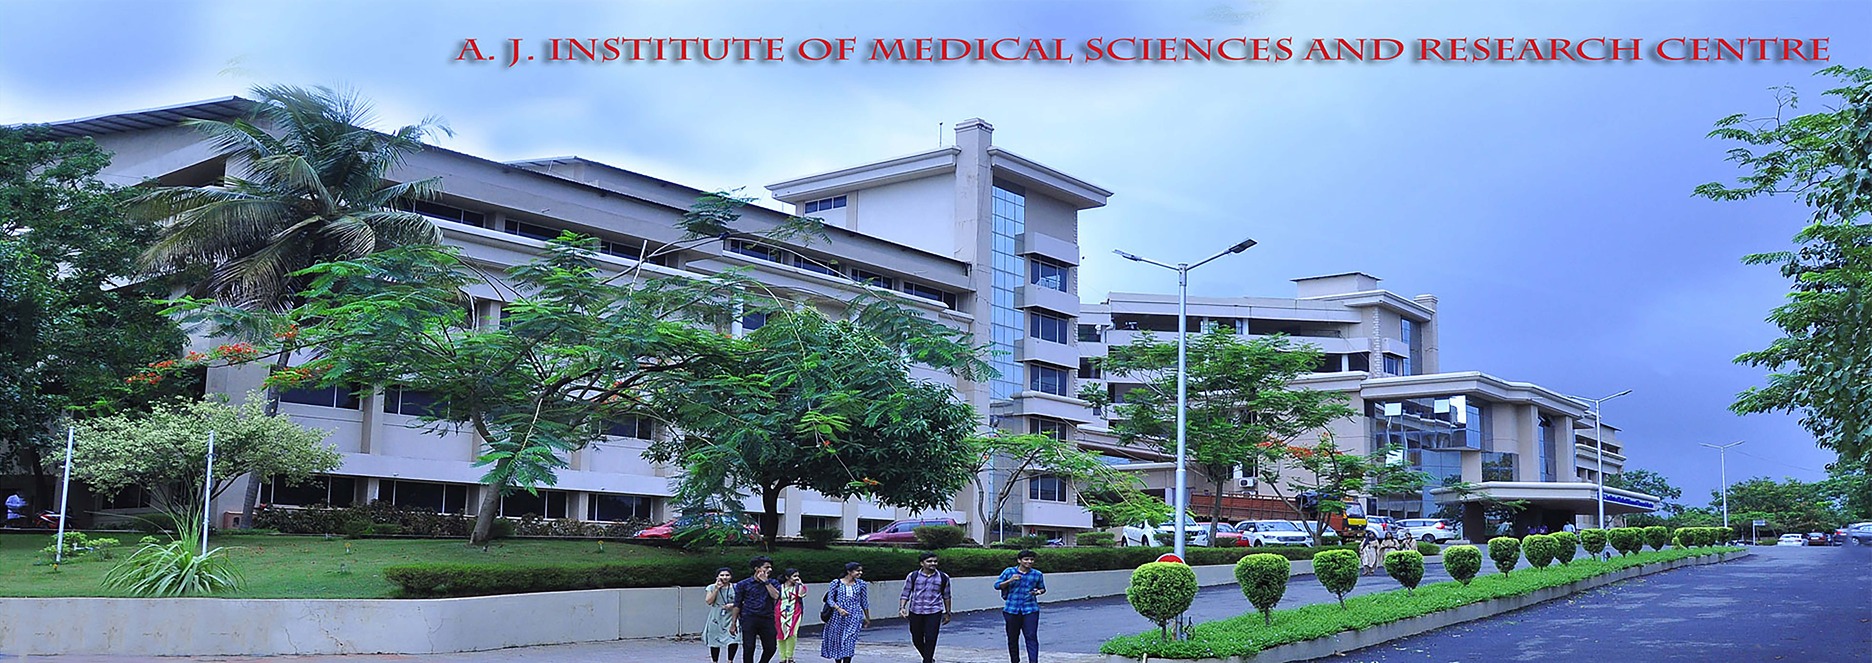 AJ Institute of Medical Sciences Mangalore Admission, Fee Structure, Facilities, Recognition